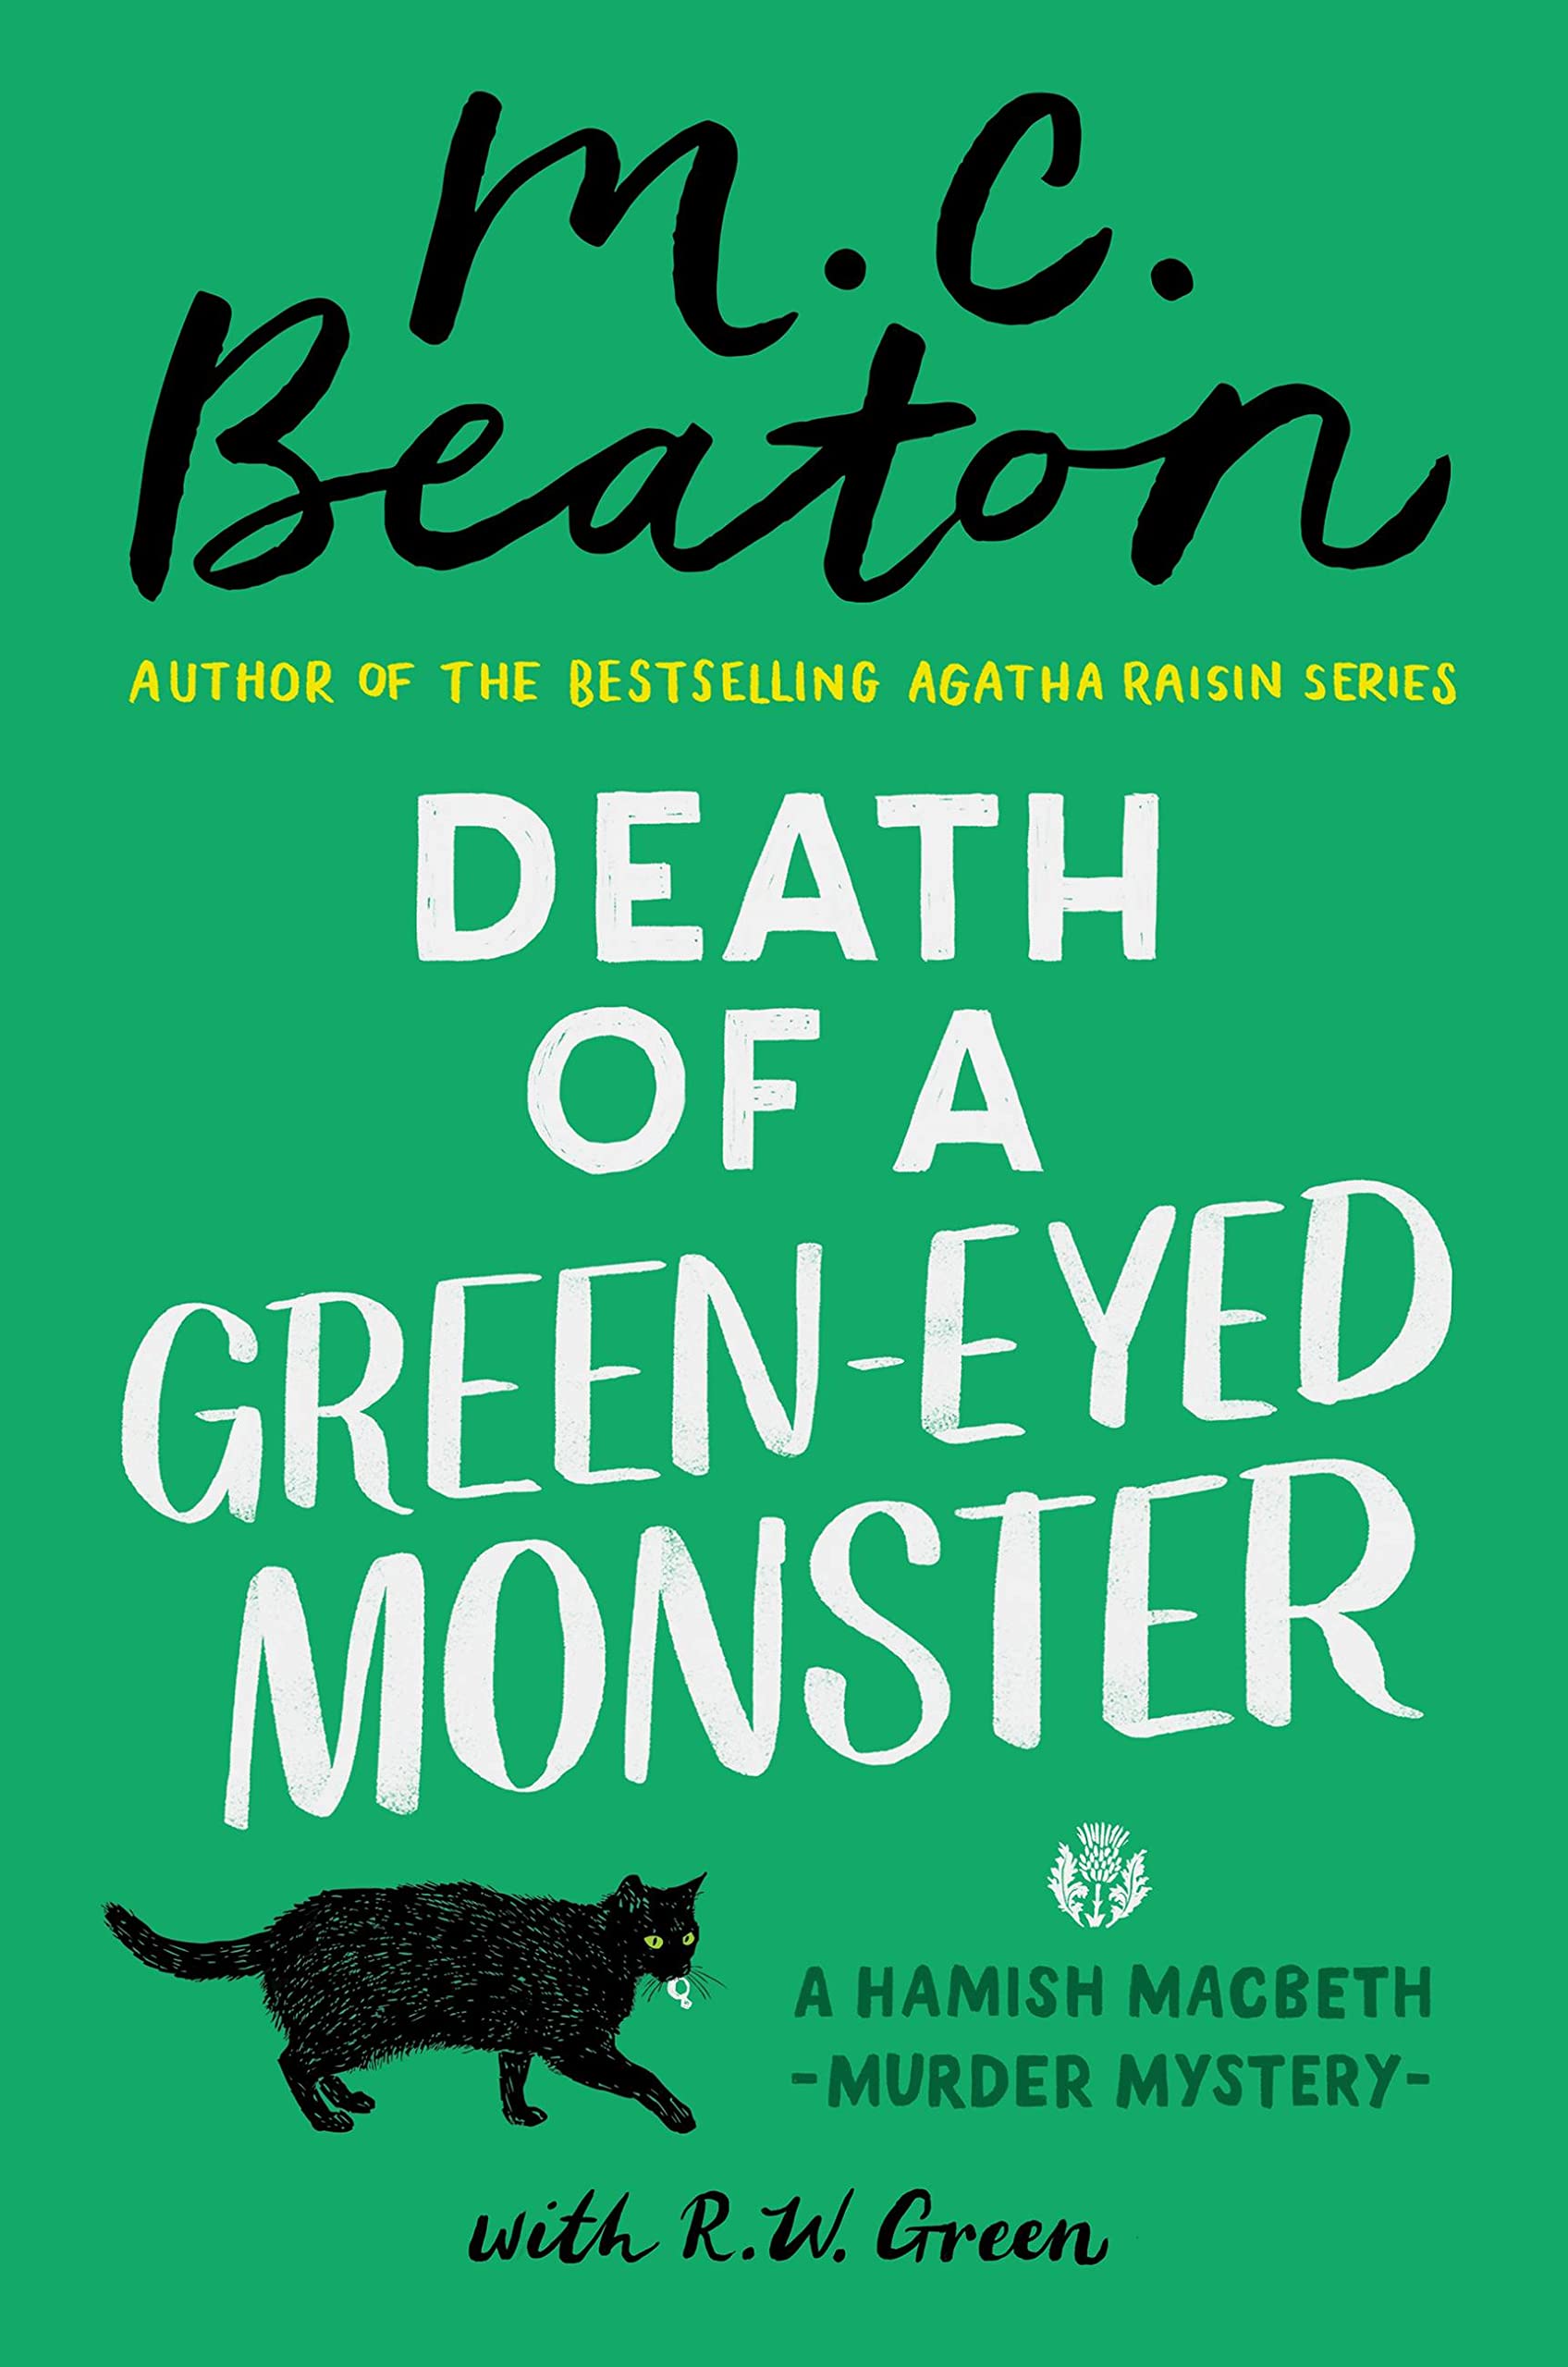 Image for "Death of a Green-Eyed Monster"